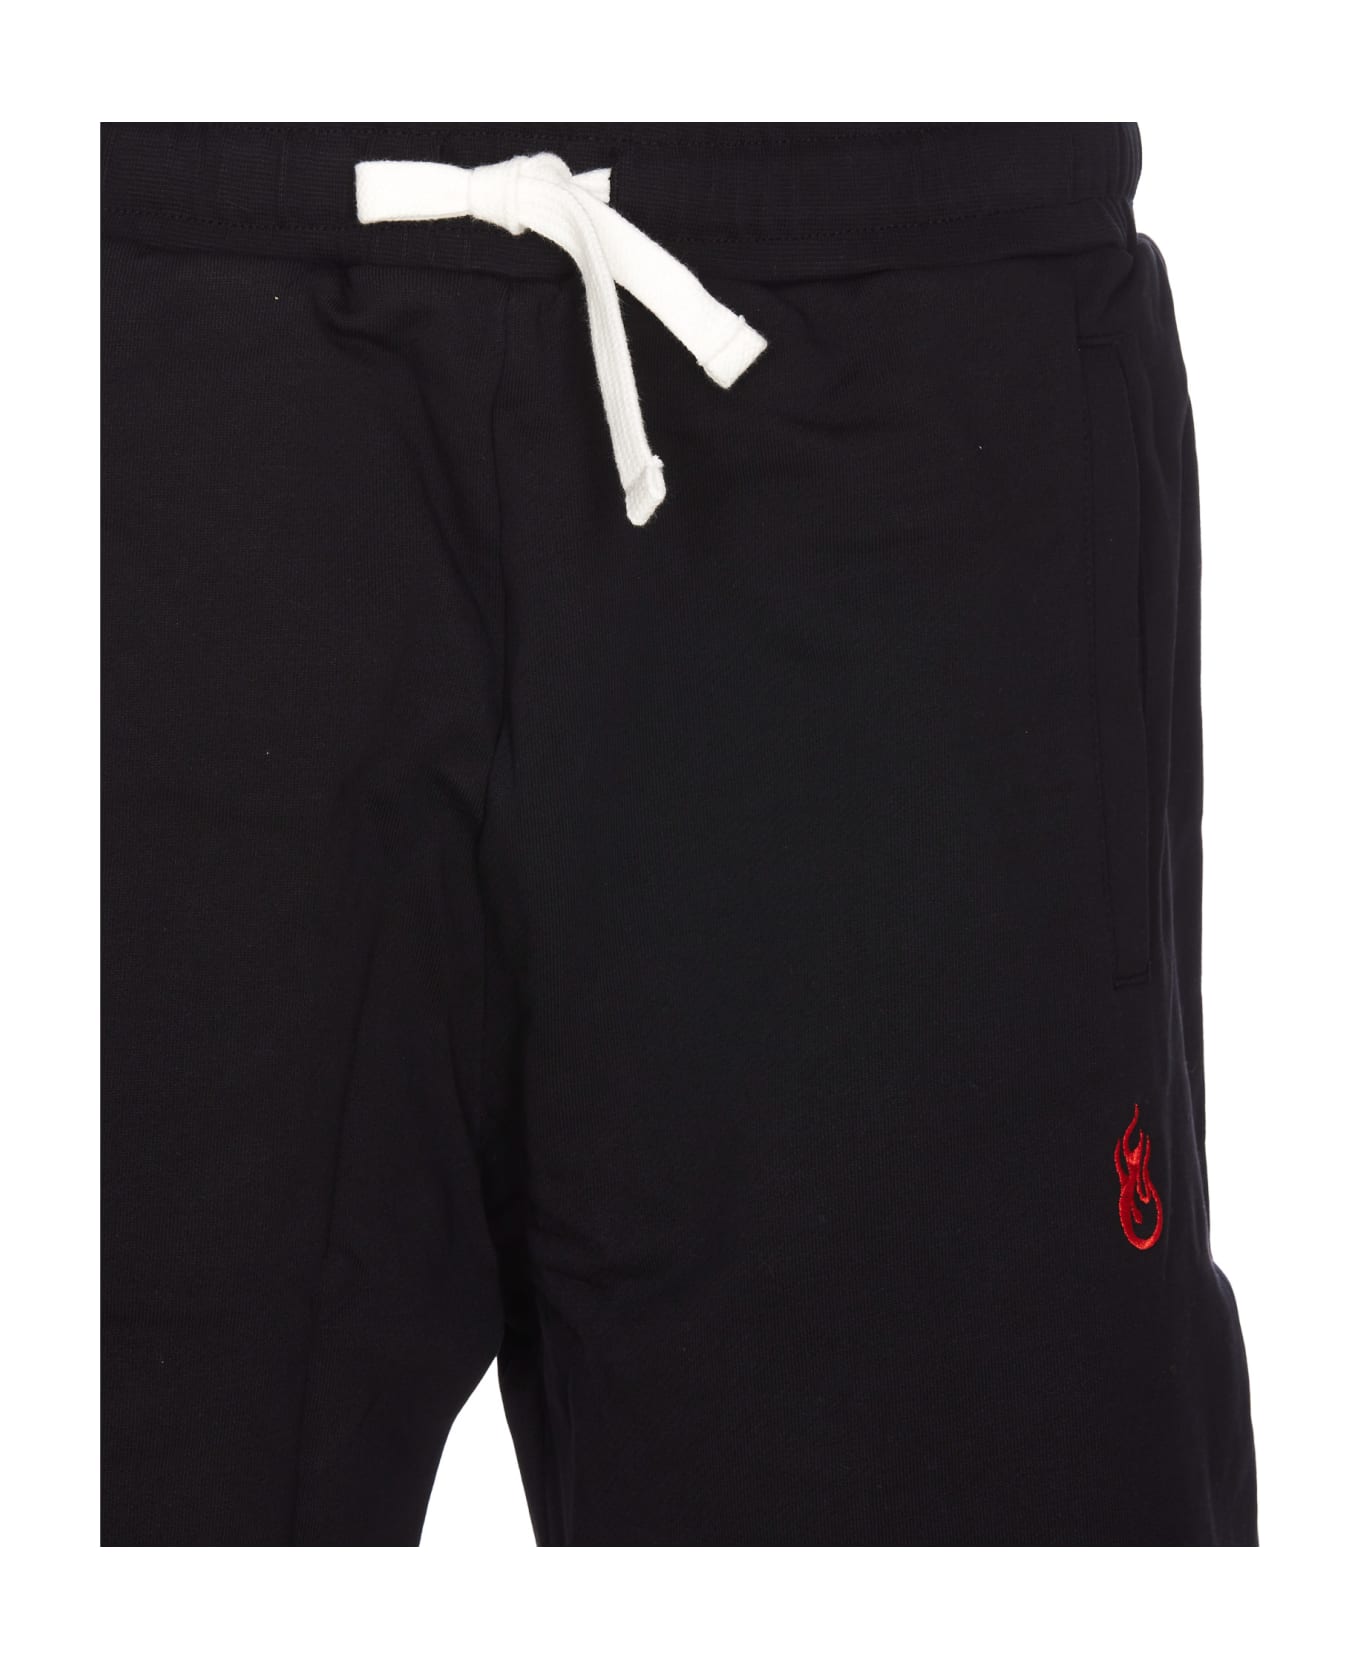 Vision of Super Shorts With Flames Logo - Black